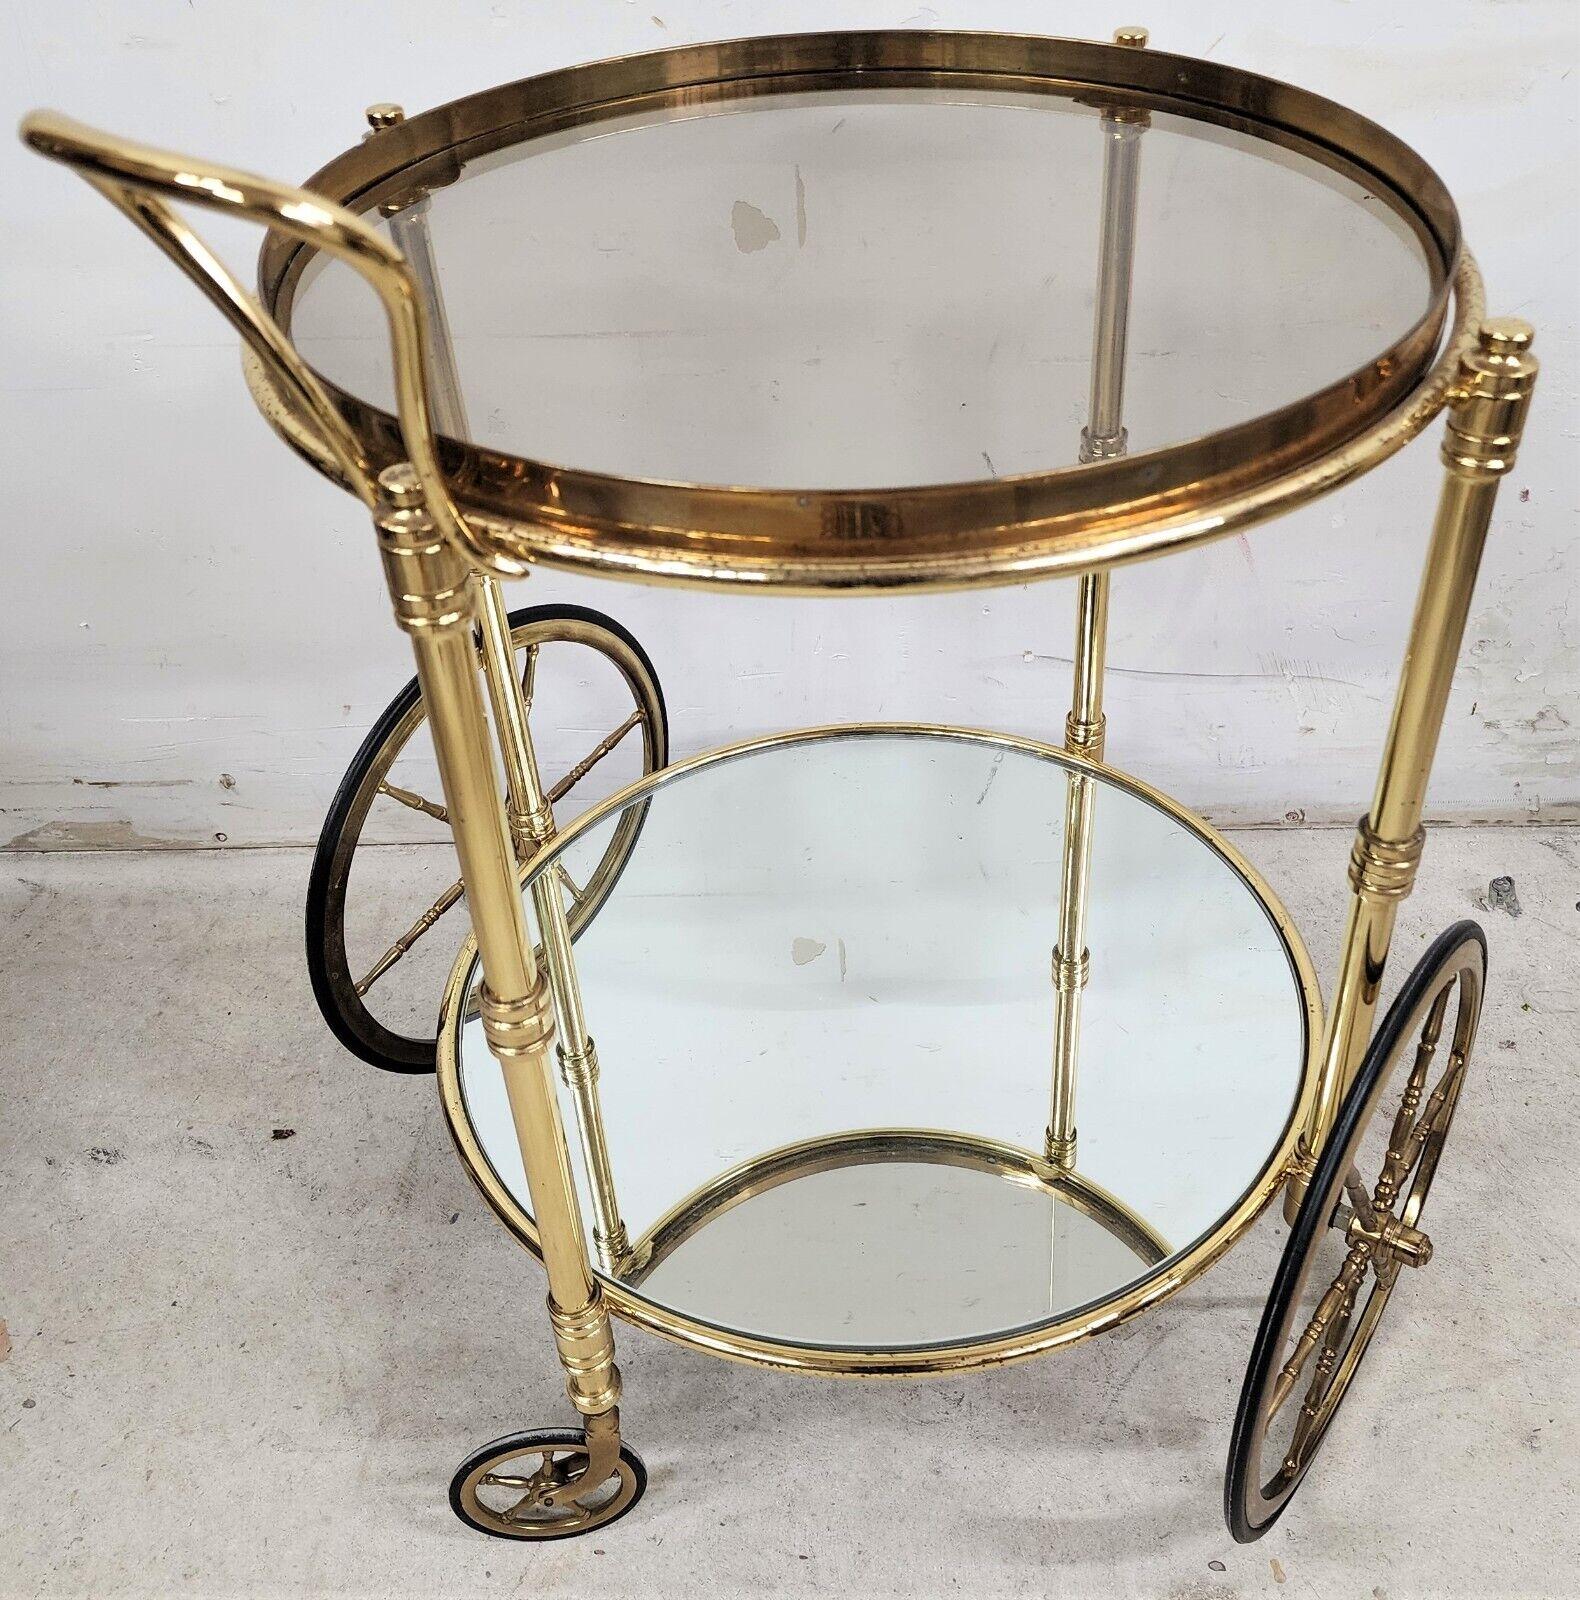 Vintage brass rolling French bar serving trolley cart
Featuring a mirror bottom shelf and a removable glass serving tray on the top level.

Approximate measurements in inches:
24